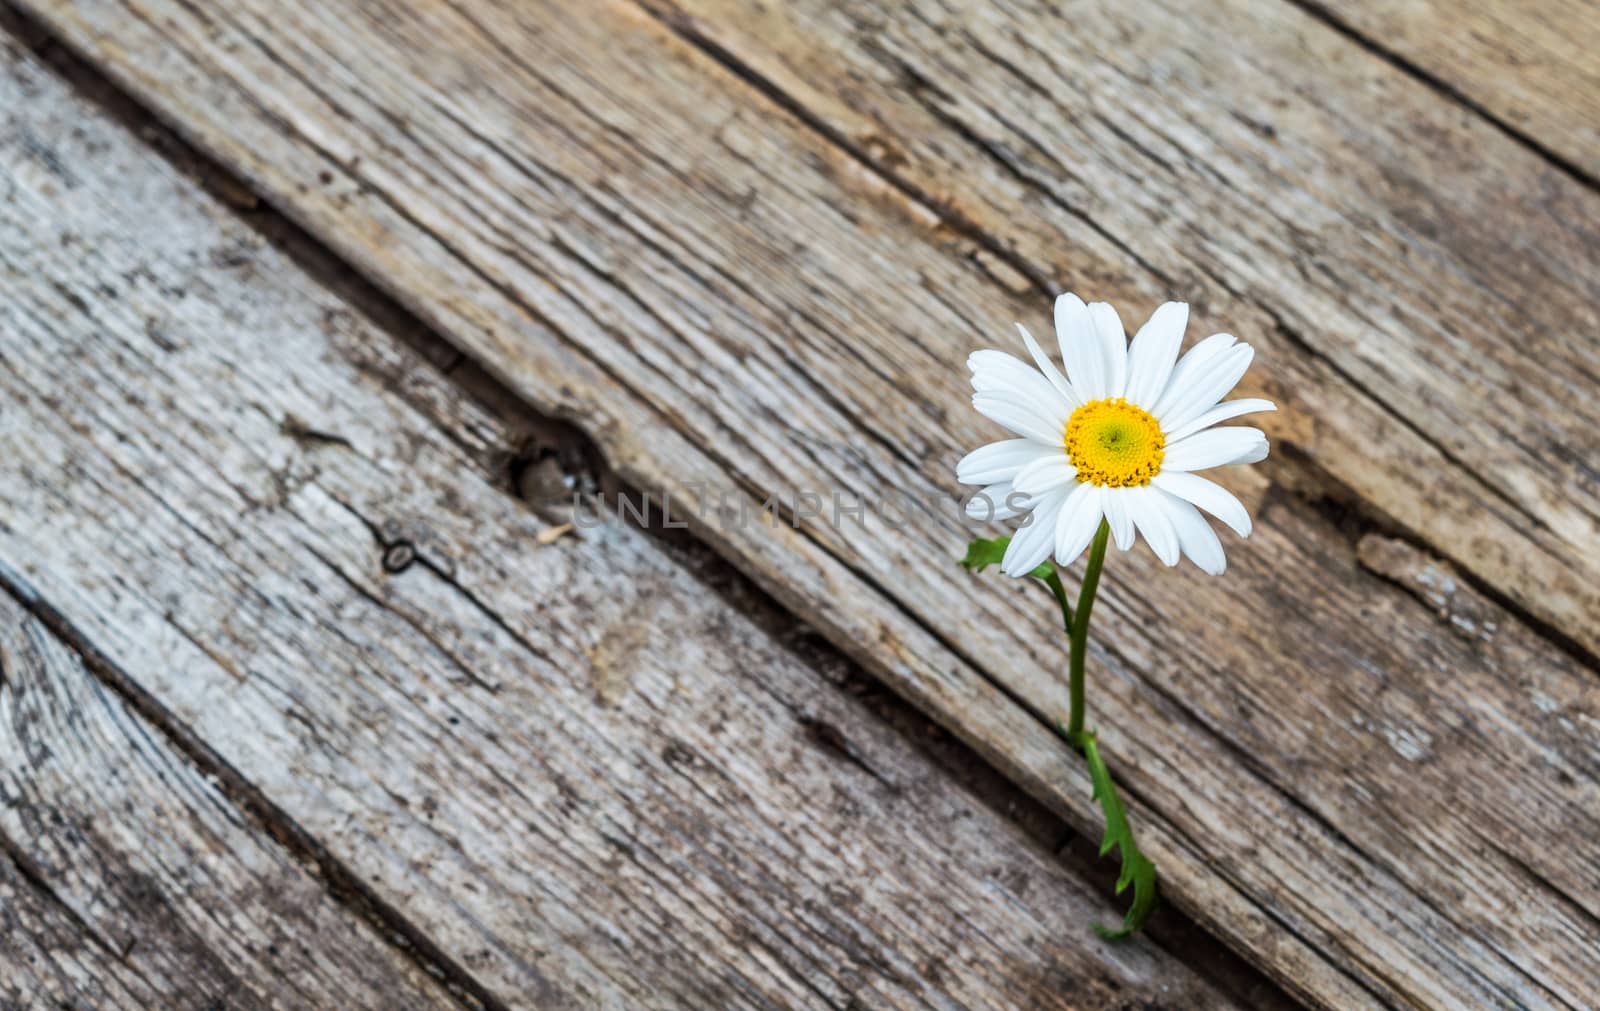 Daisy flower standing alone on wooden background 